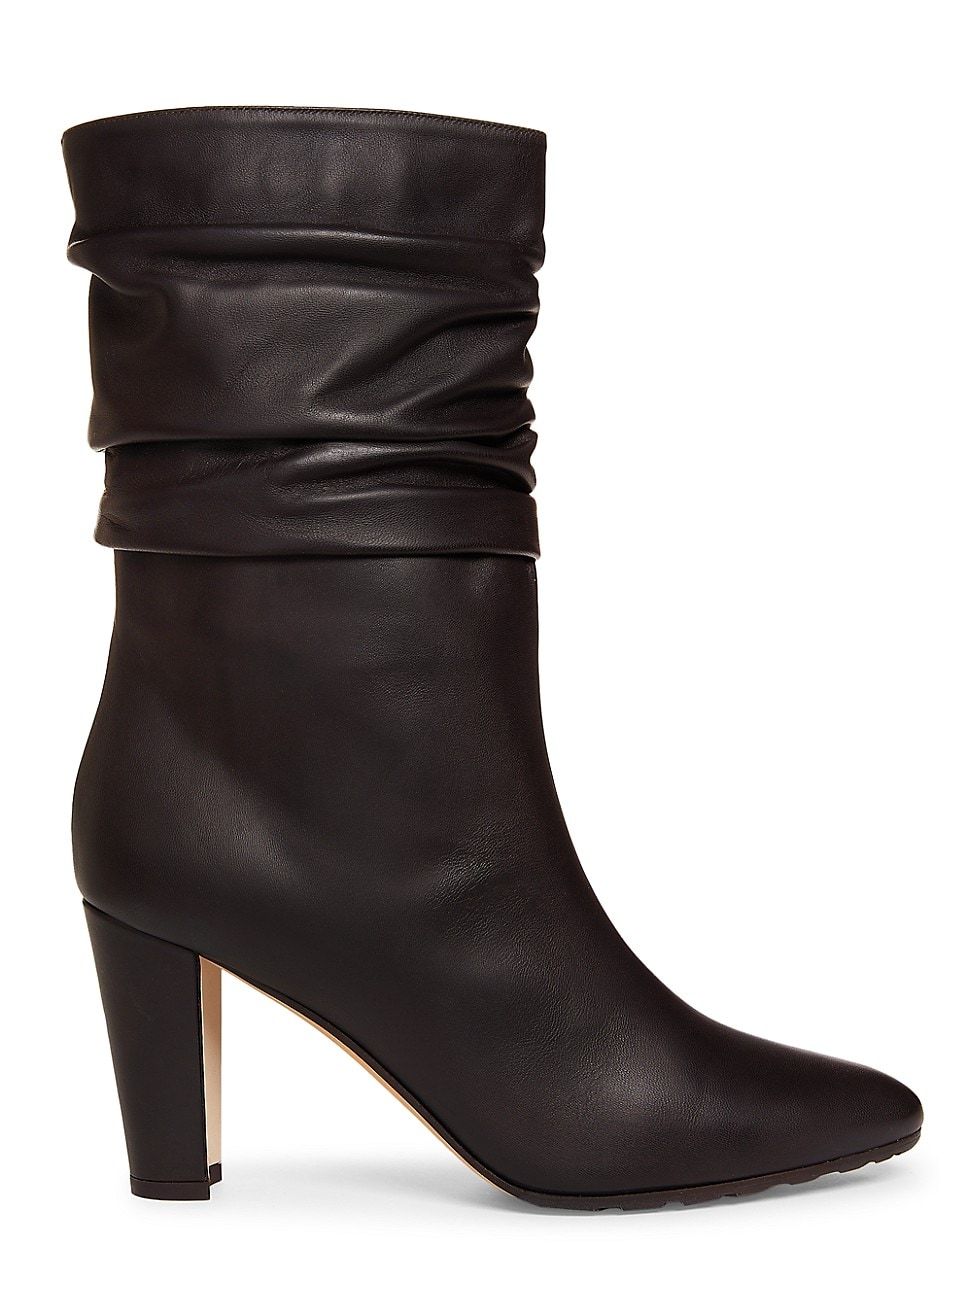 Manolo Blahnik Calasso Ruched Leather Boots | Saks Fifth Avenue